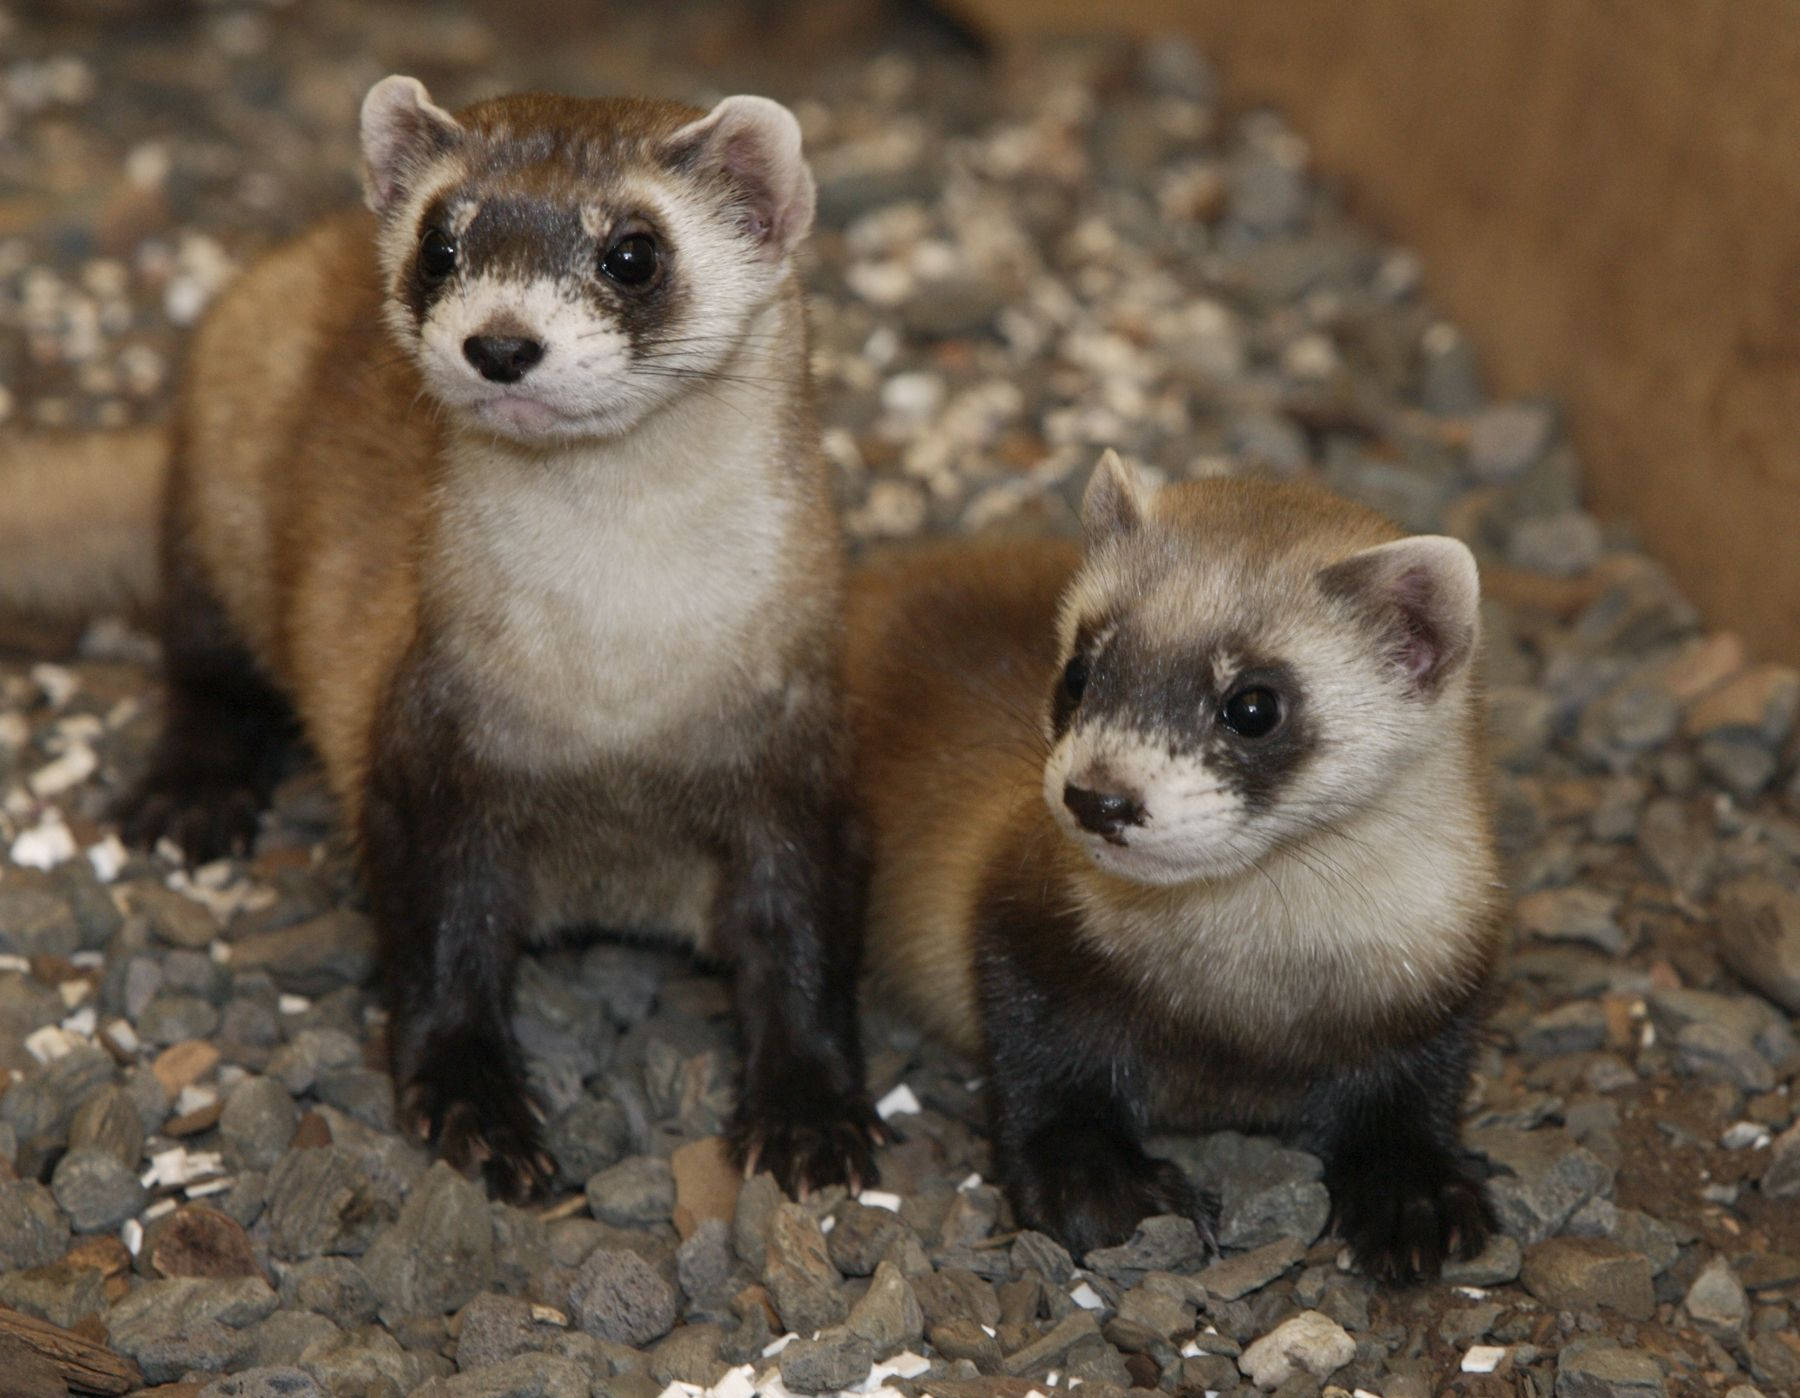 A Close-up Image Of A Black-footed Ferret